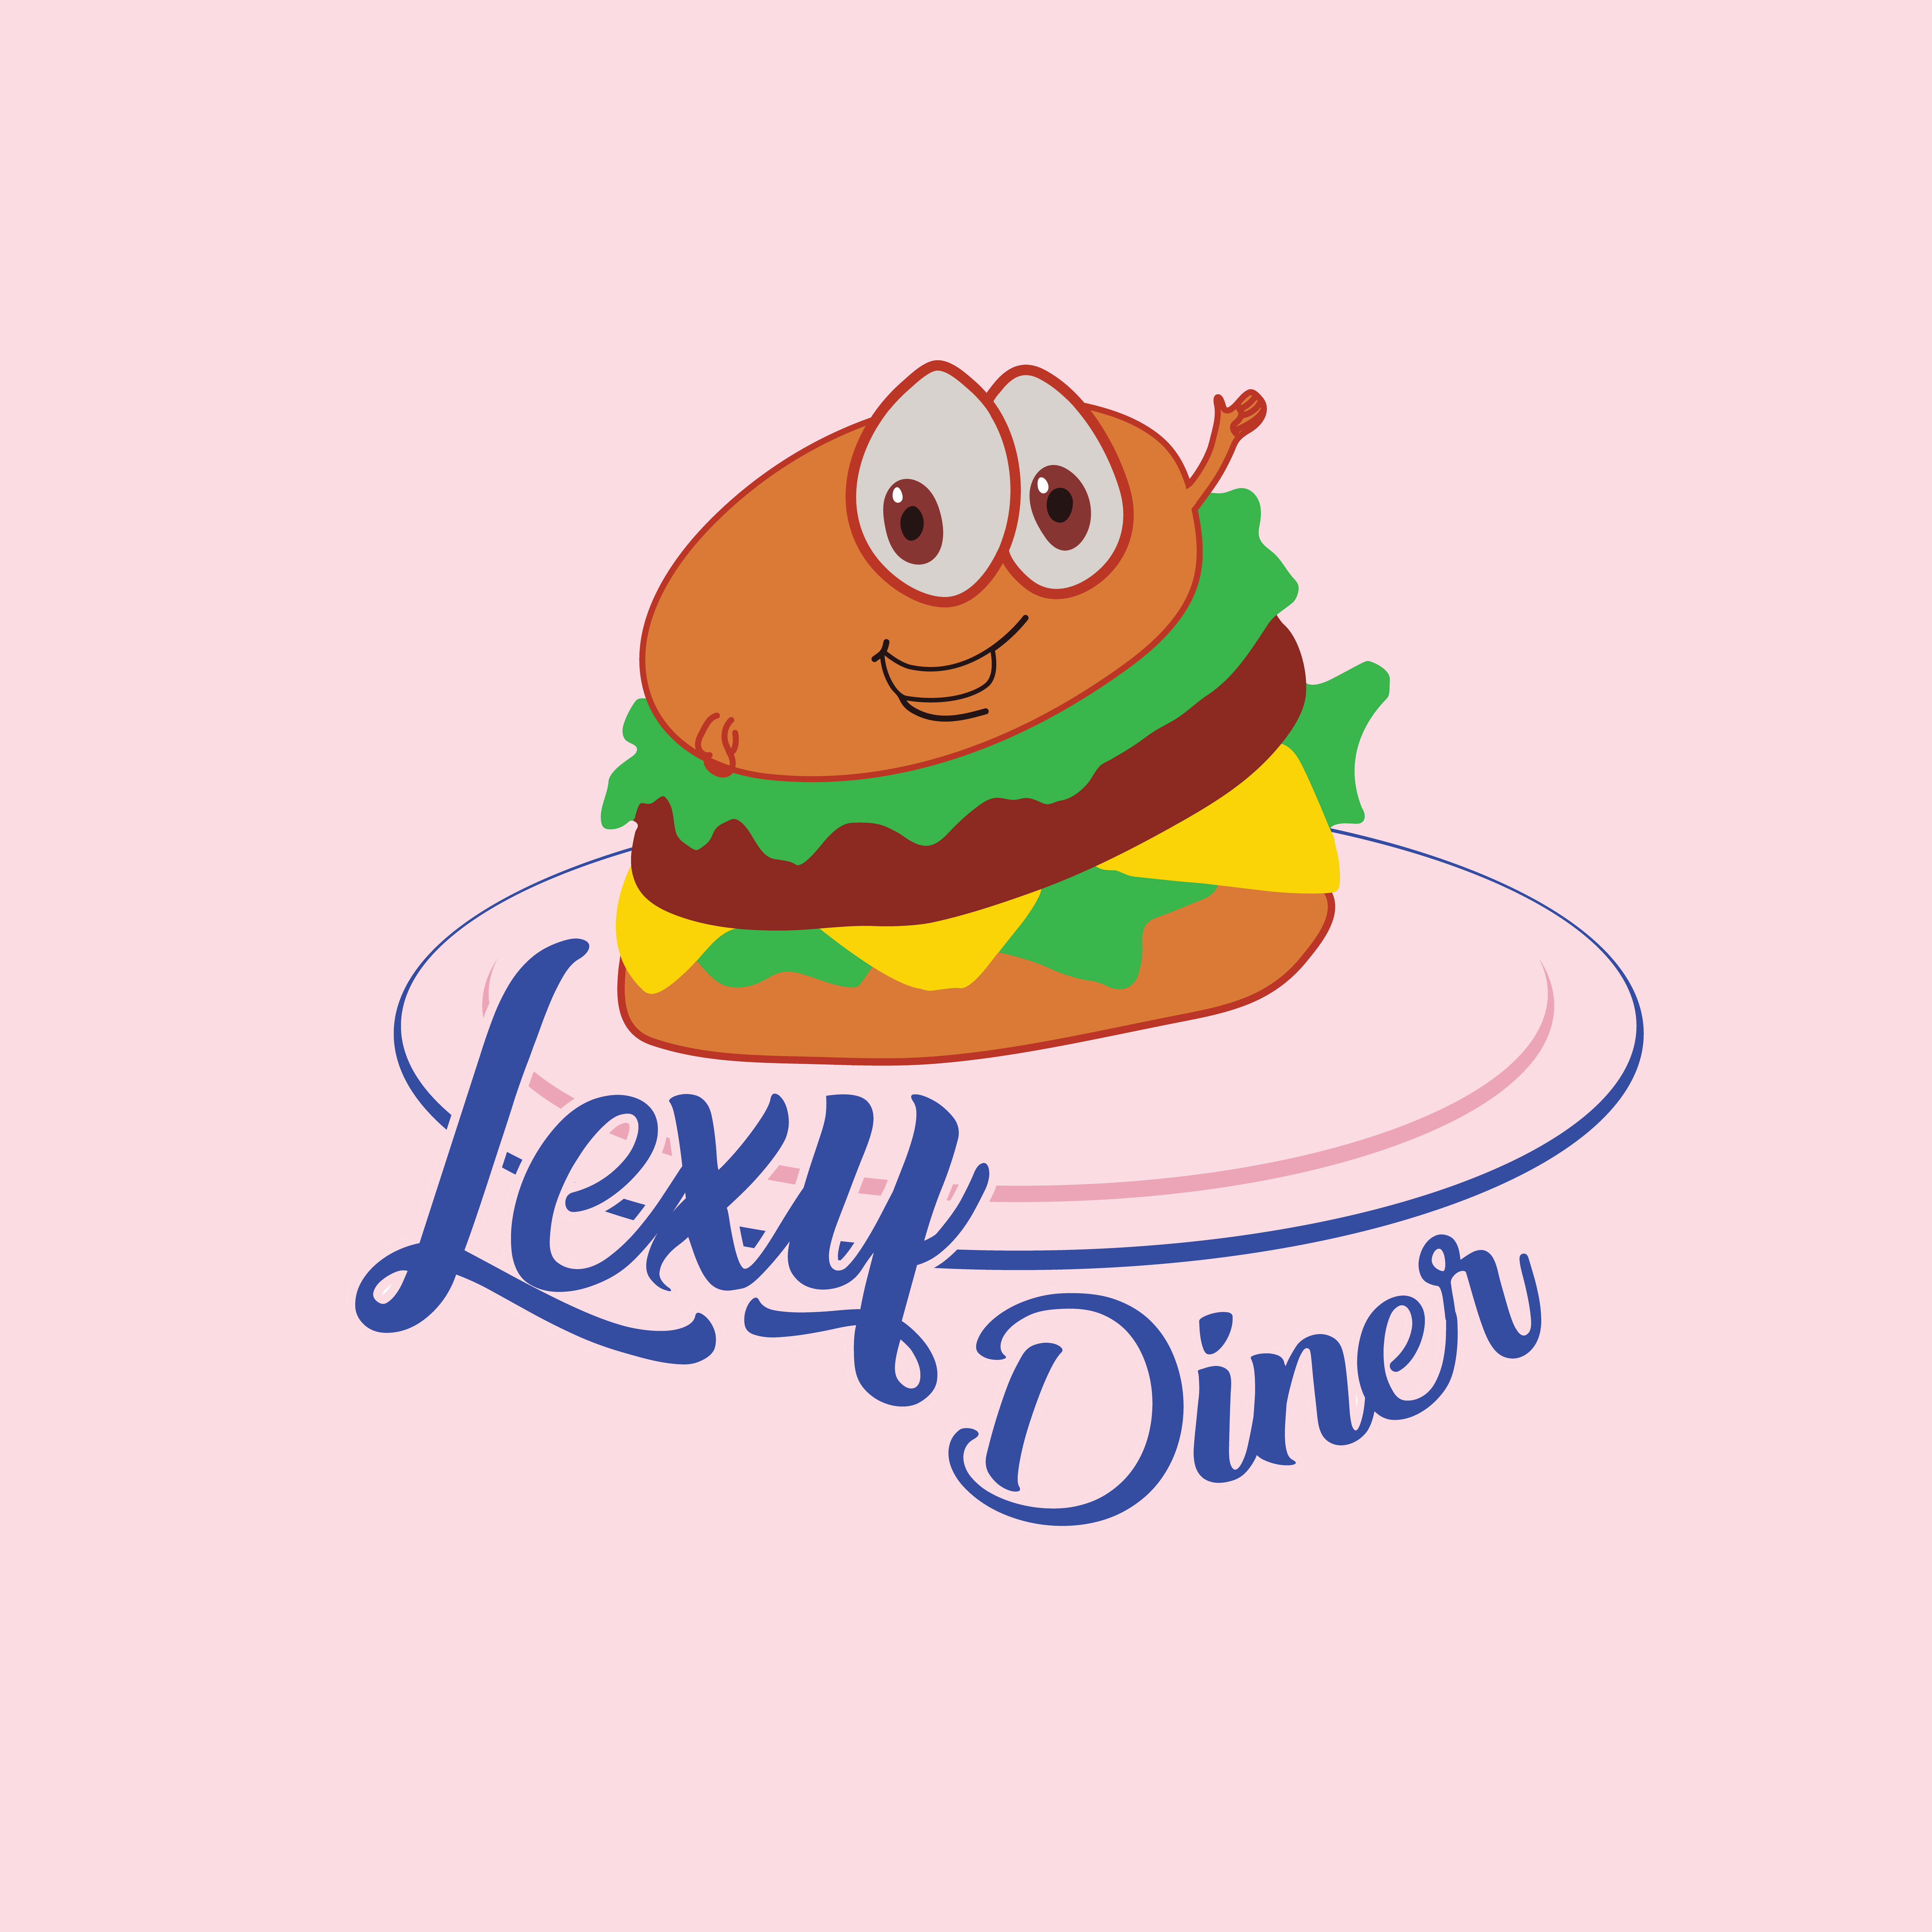 The shop logo shows a friendly burger. Lexy Diner & Takeaways serves burgers & more since 2014. Don´t miss it! Burgers, fries, chicken nuggets, kebab and more are waiting for you.